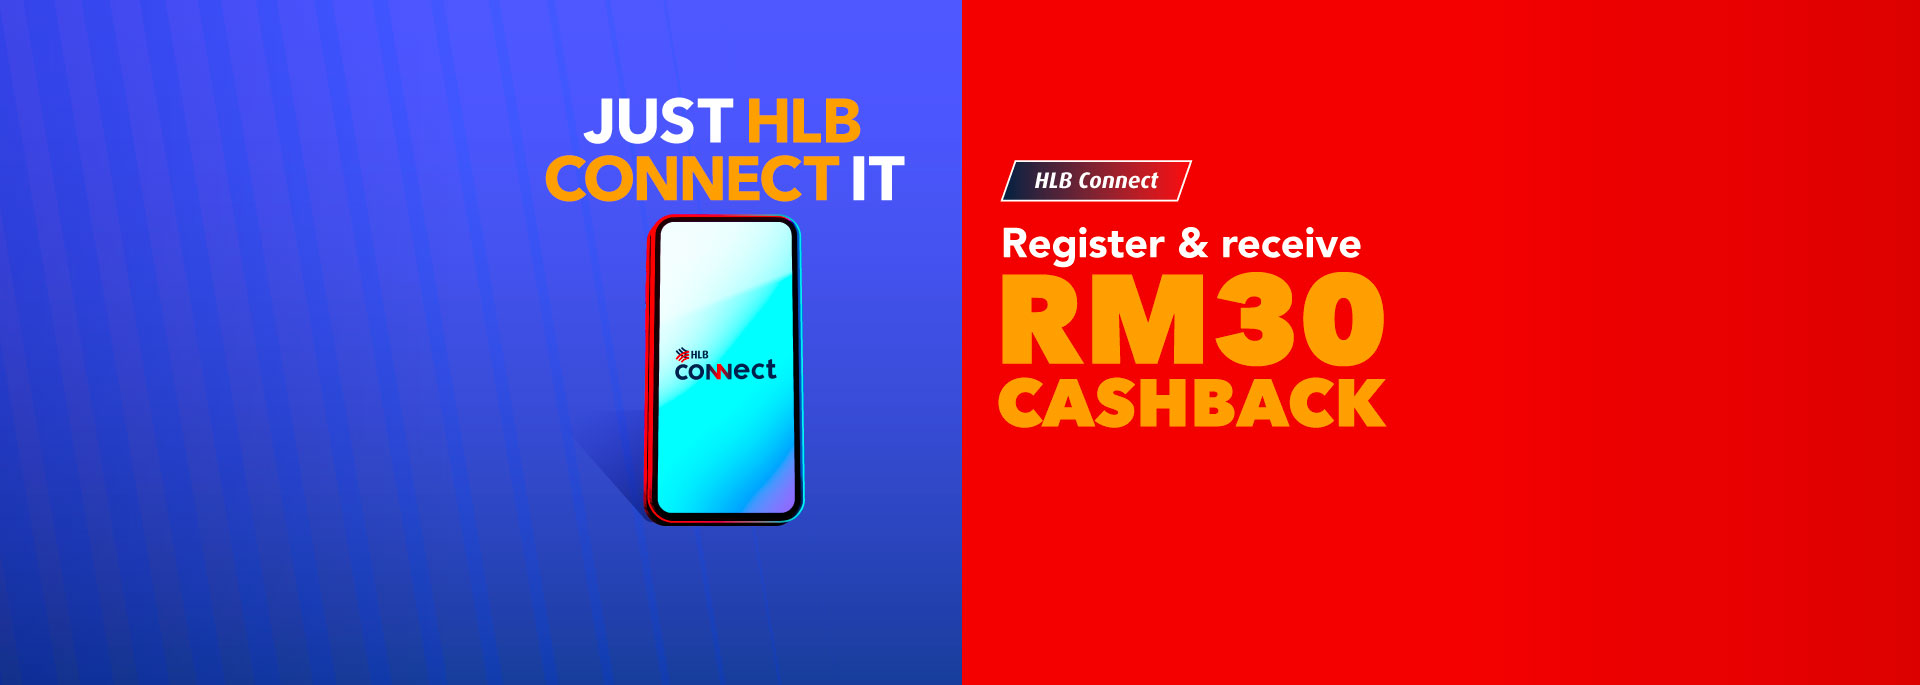 Register HLB Connect and receive RM30 Cashback